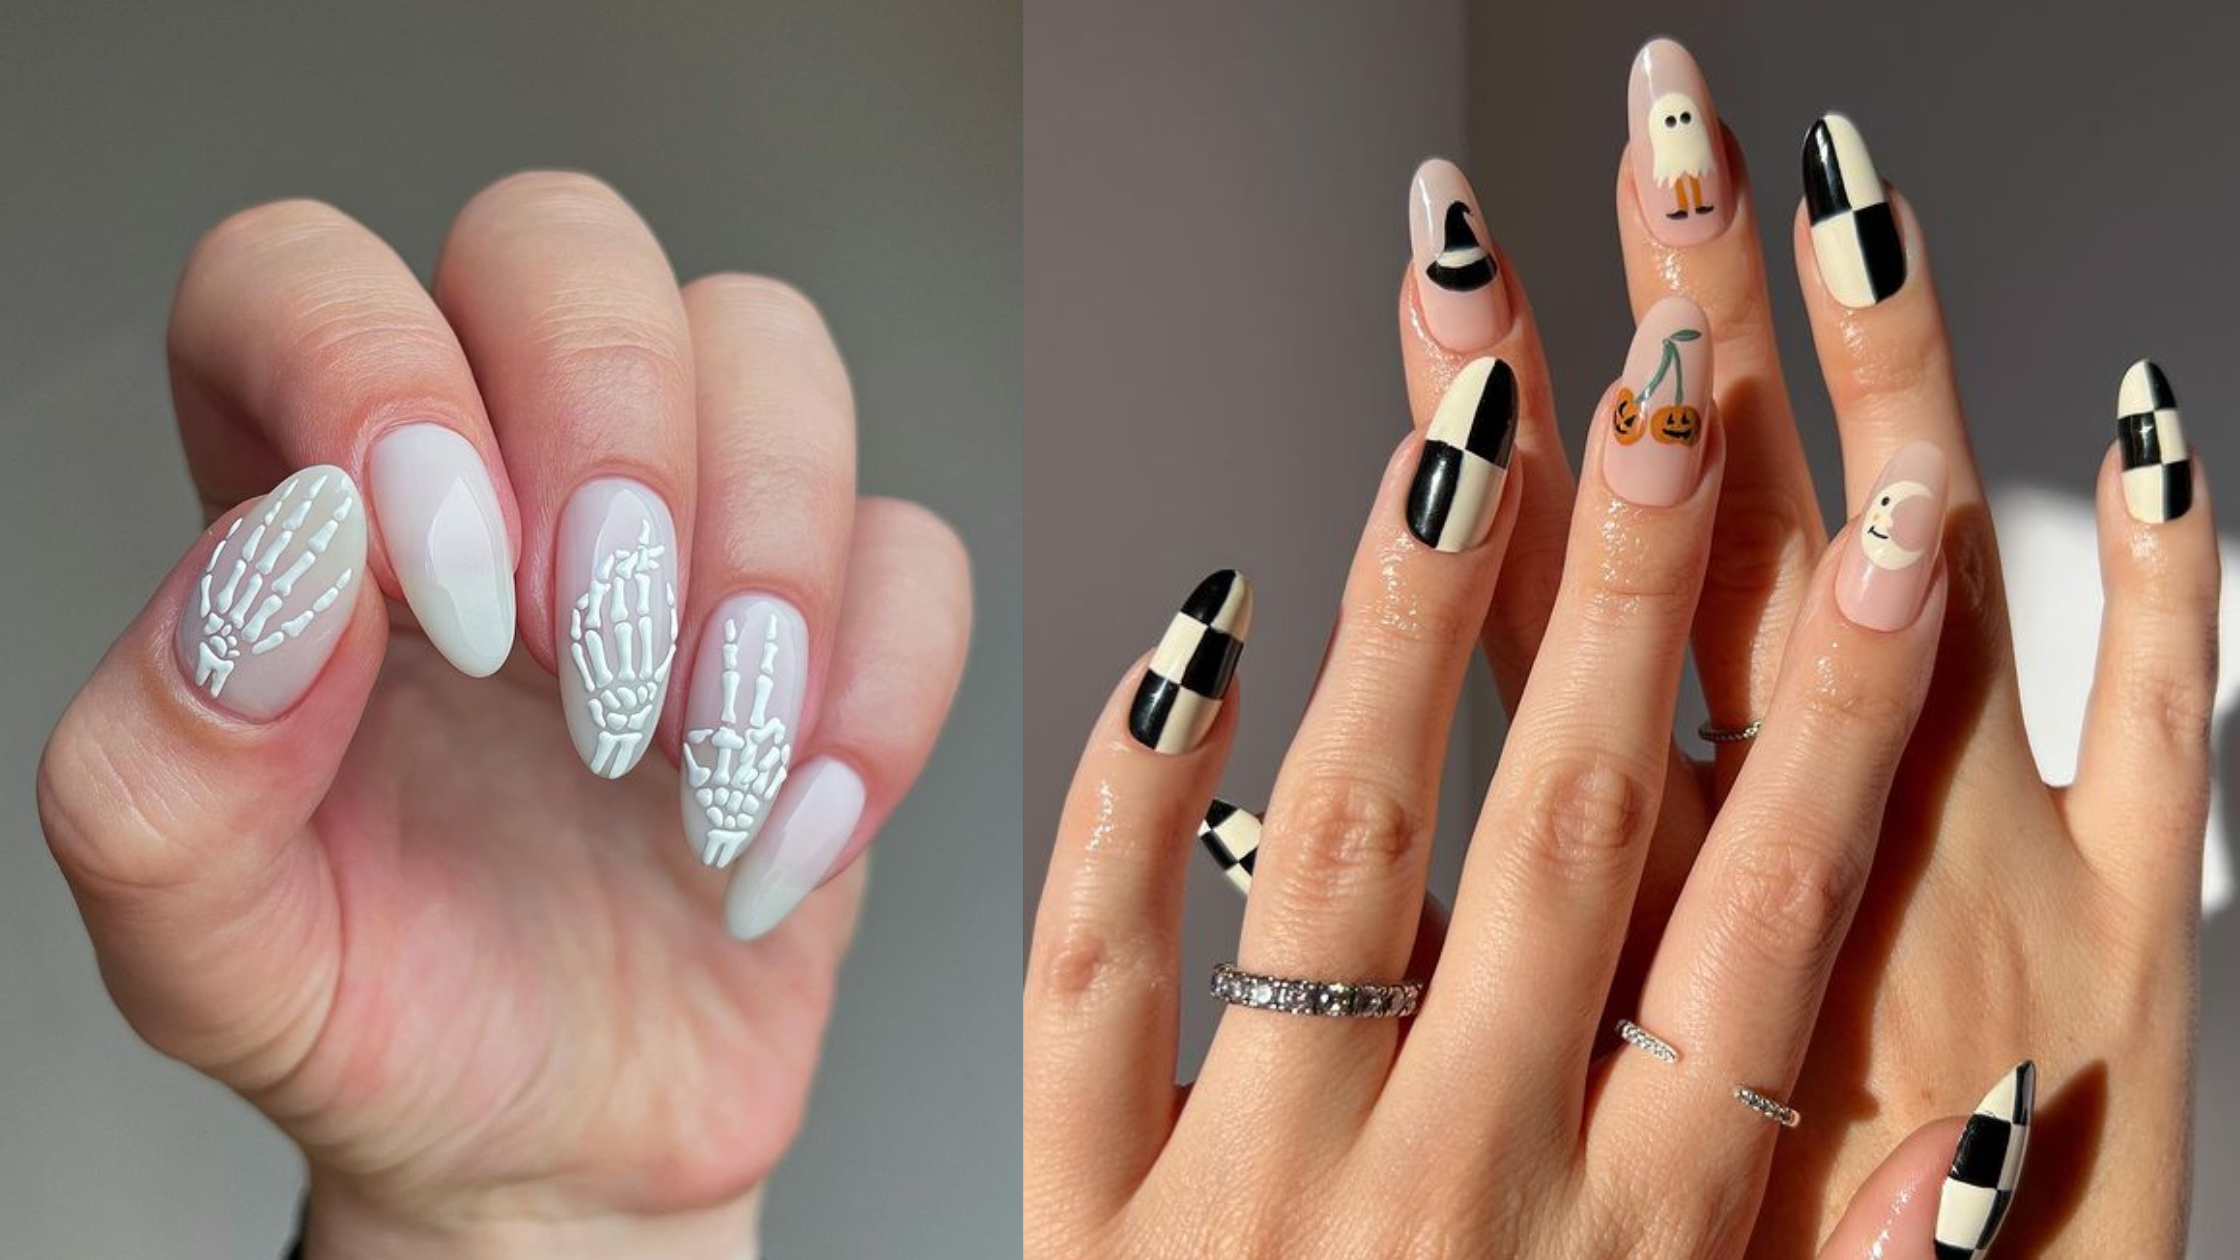 CoolNail Classic Black White Drawing Stiletto False Nails Designs Medium  Long Fake Nail Manicure Artificial Nails Tips Free Glue Sticker :  Amazon.in: Beauty